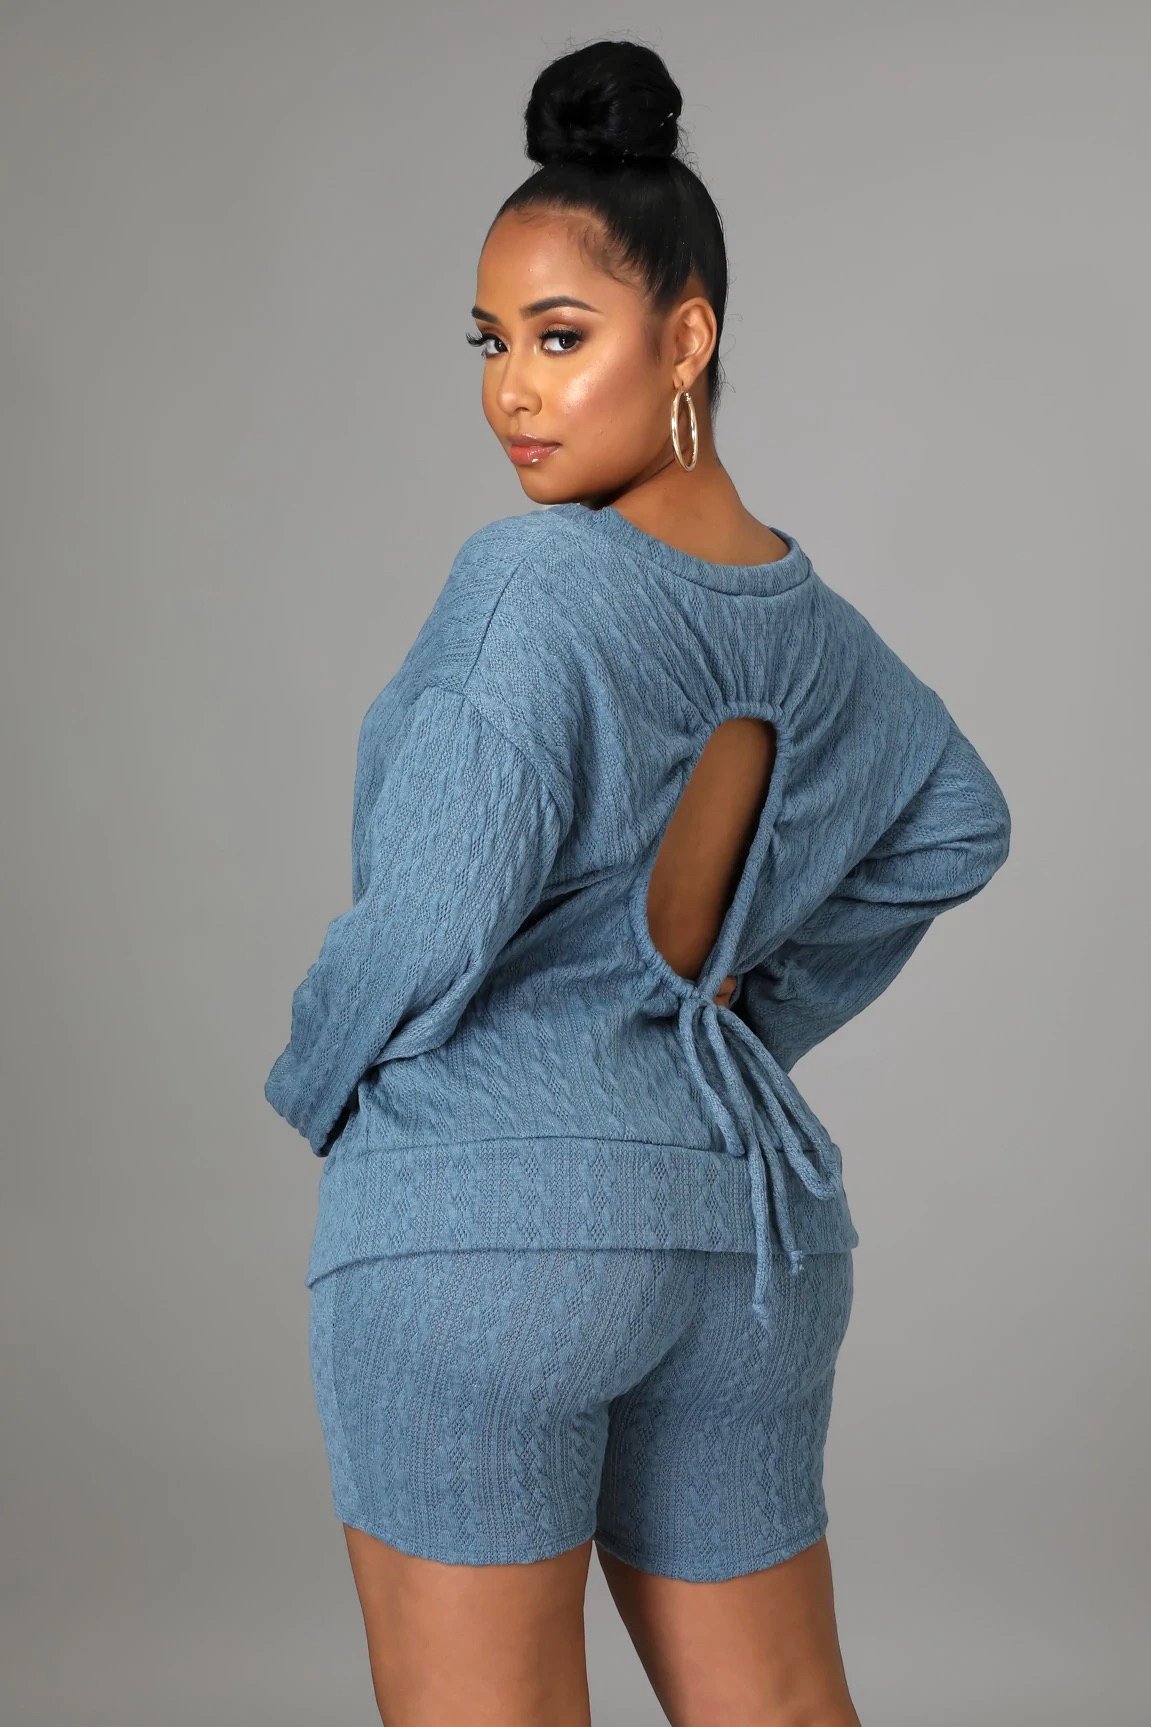 Don't Get It Twisted Sweater Short Set Teal Blue - Ali’s Couture 